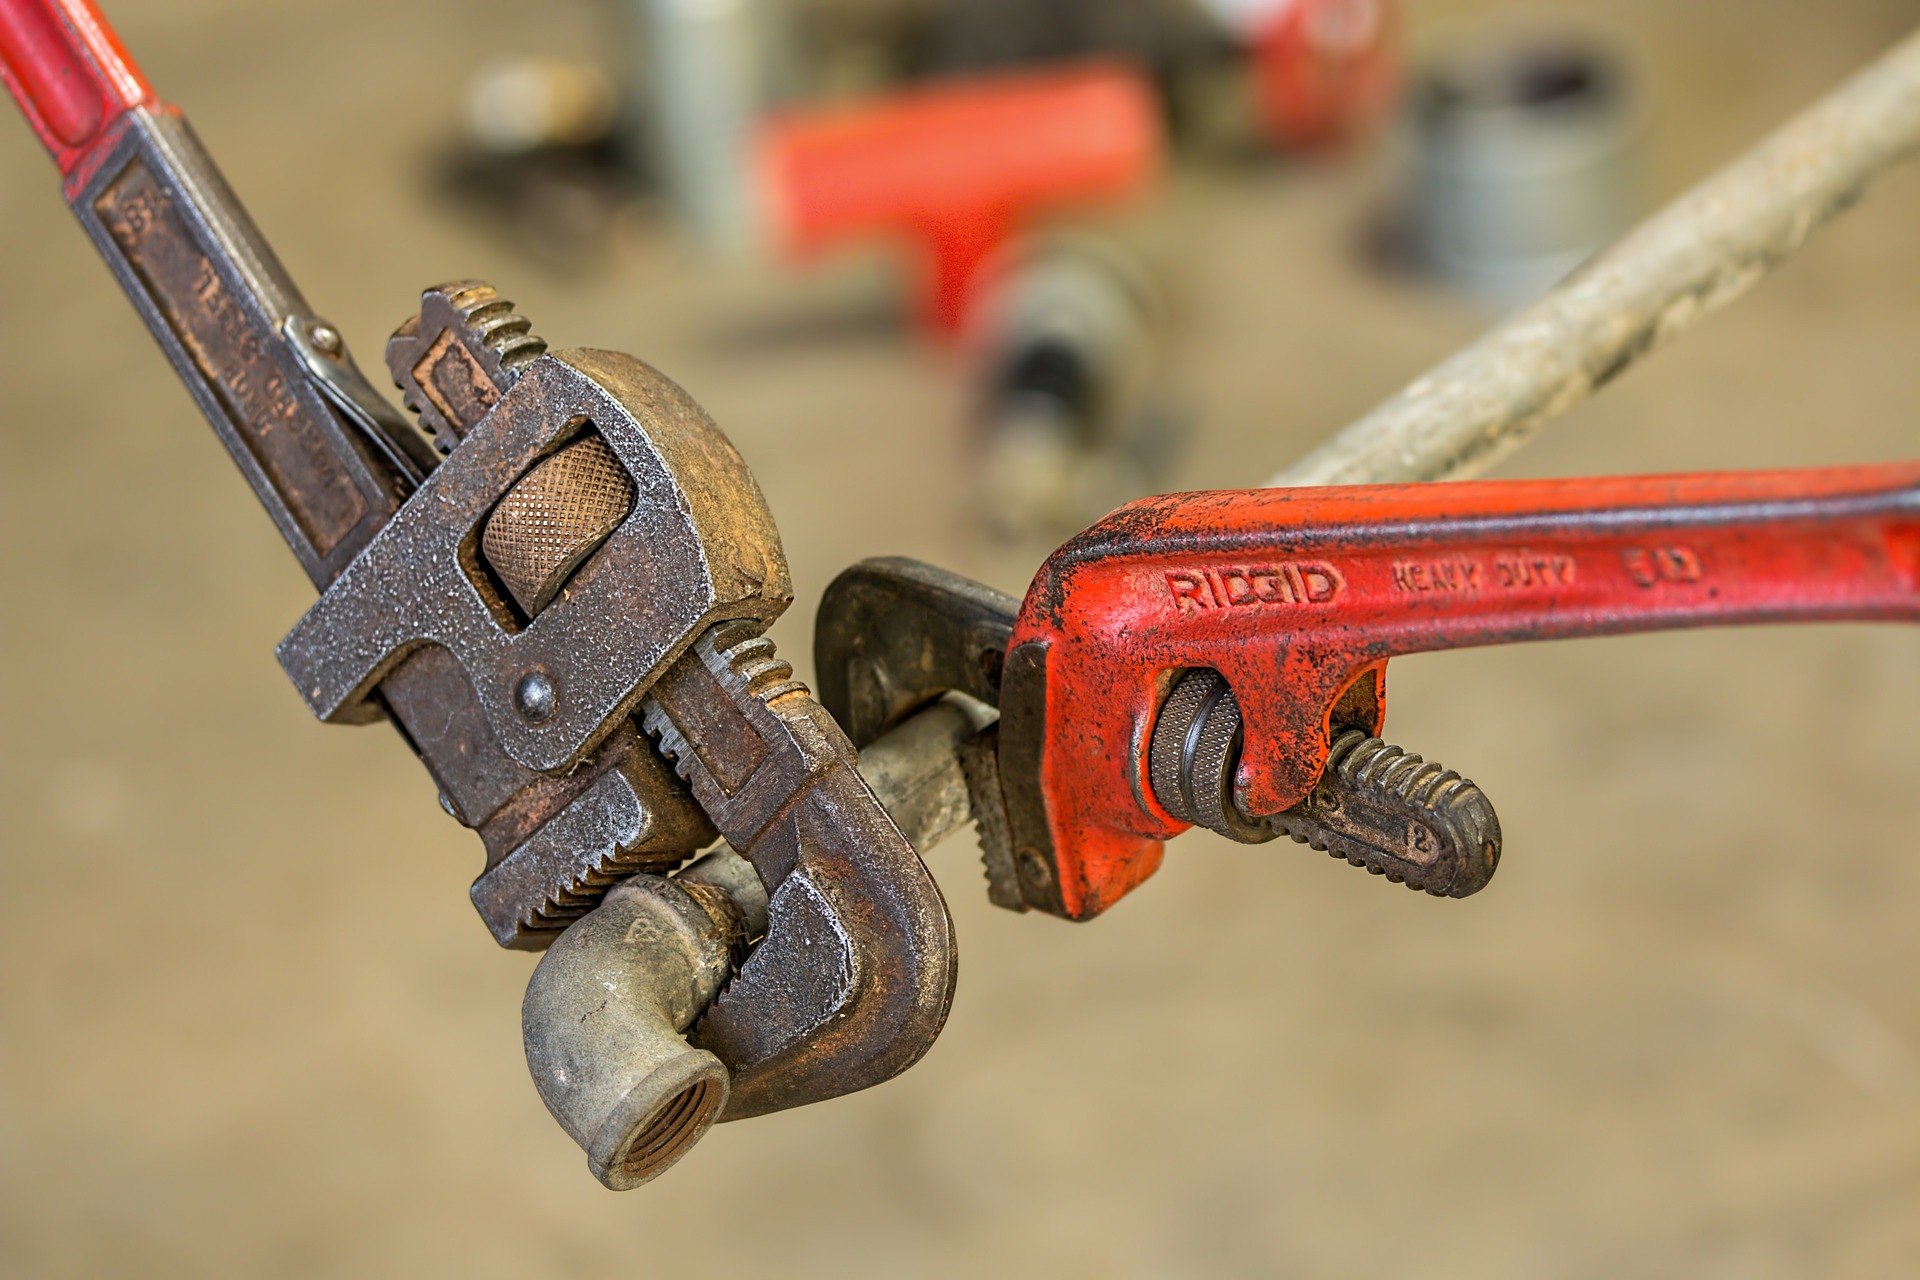 BIG-TOOLS-The-World-of-Wrenches-Different-Types-and-Applications